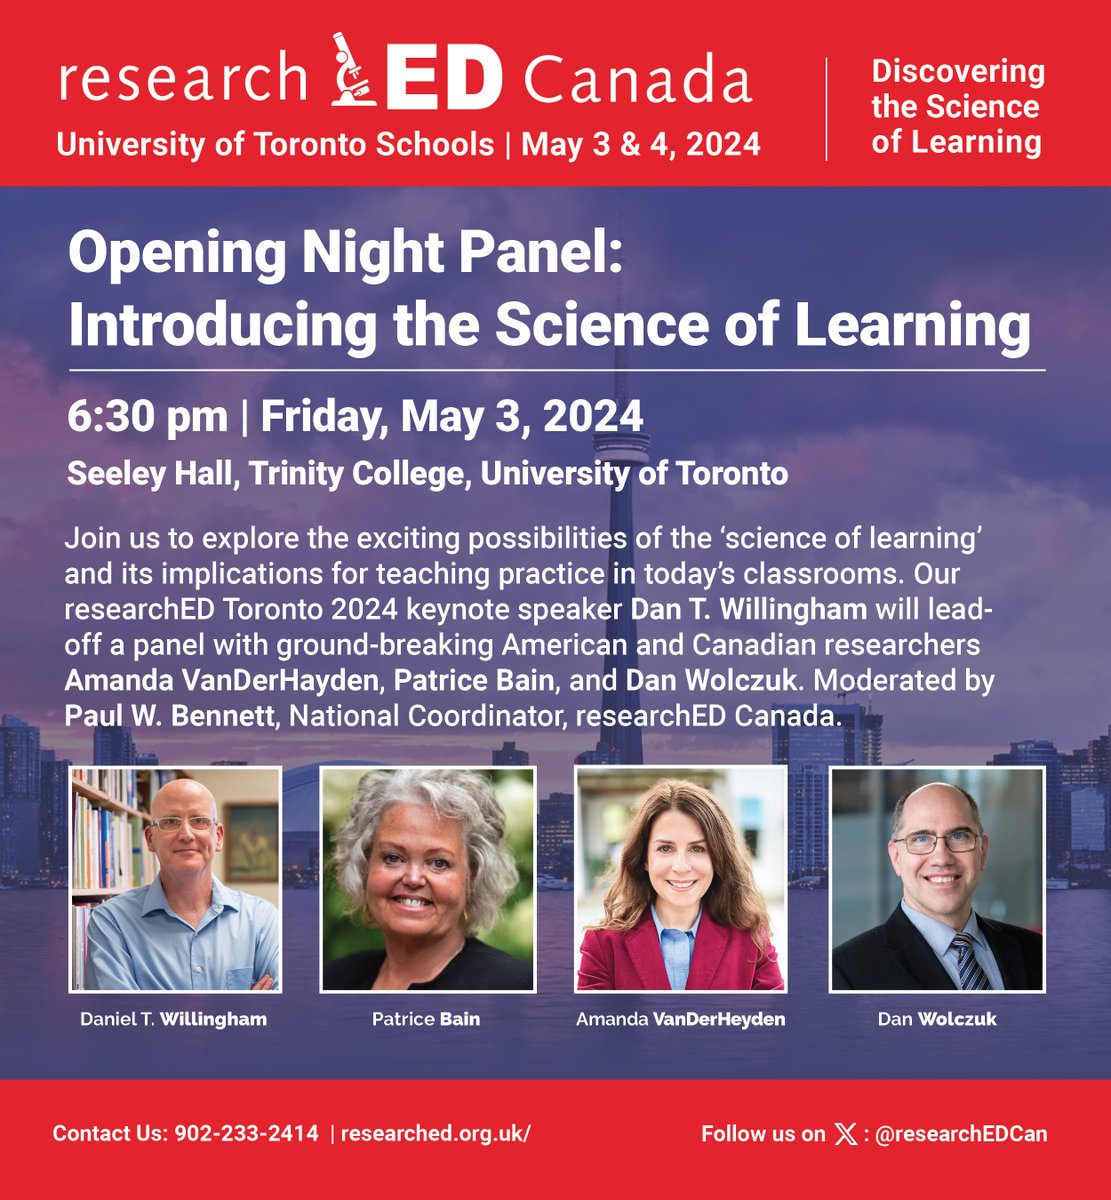 Opening Night:  Look What's Happening Next Weekend! Our @researchEDCan Toronto 24 conference opens Friday May 3 at 6:30 pm at Seeley Hall, Trinity College. Ty @DTWillingham @C_Hendrick and Panelists for helping the launch the event, #cdned #ONTed